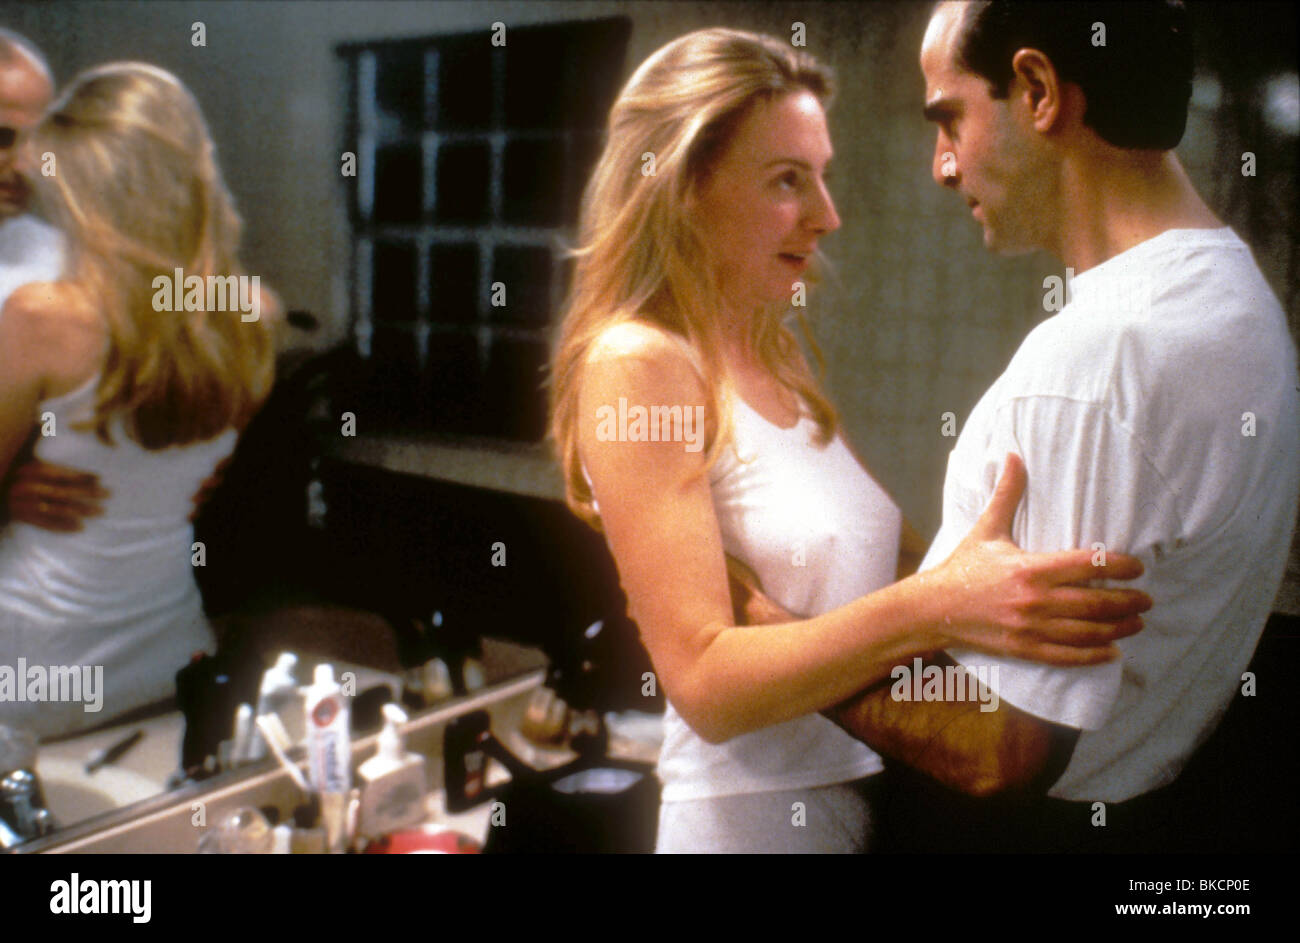 THE DAYTRIPPERS (1996) HOPE DAVIS, STANLEY TUCCI DAYT 011 Stock Photo